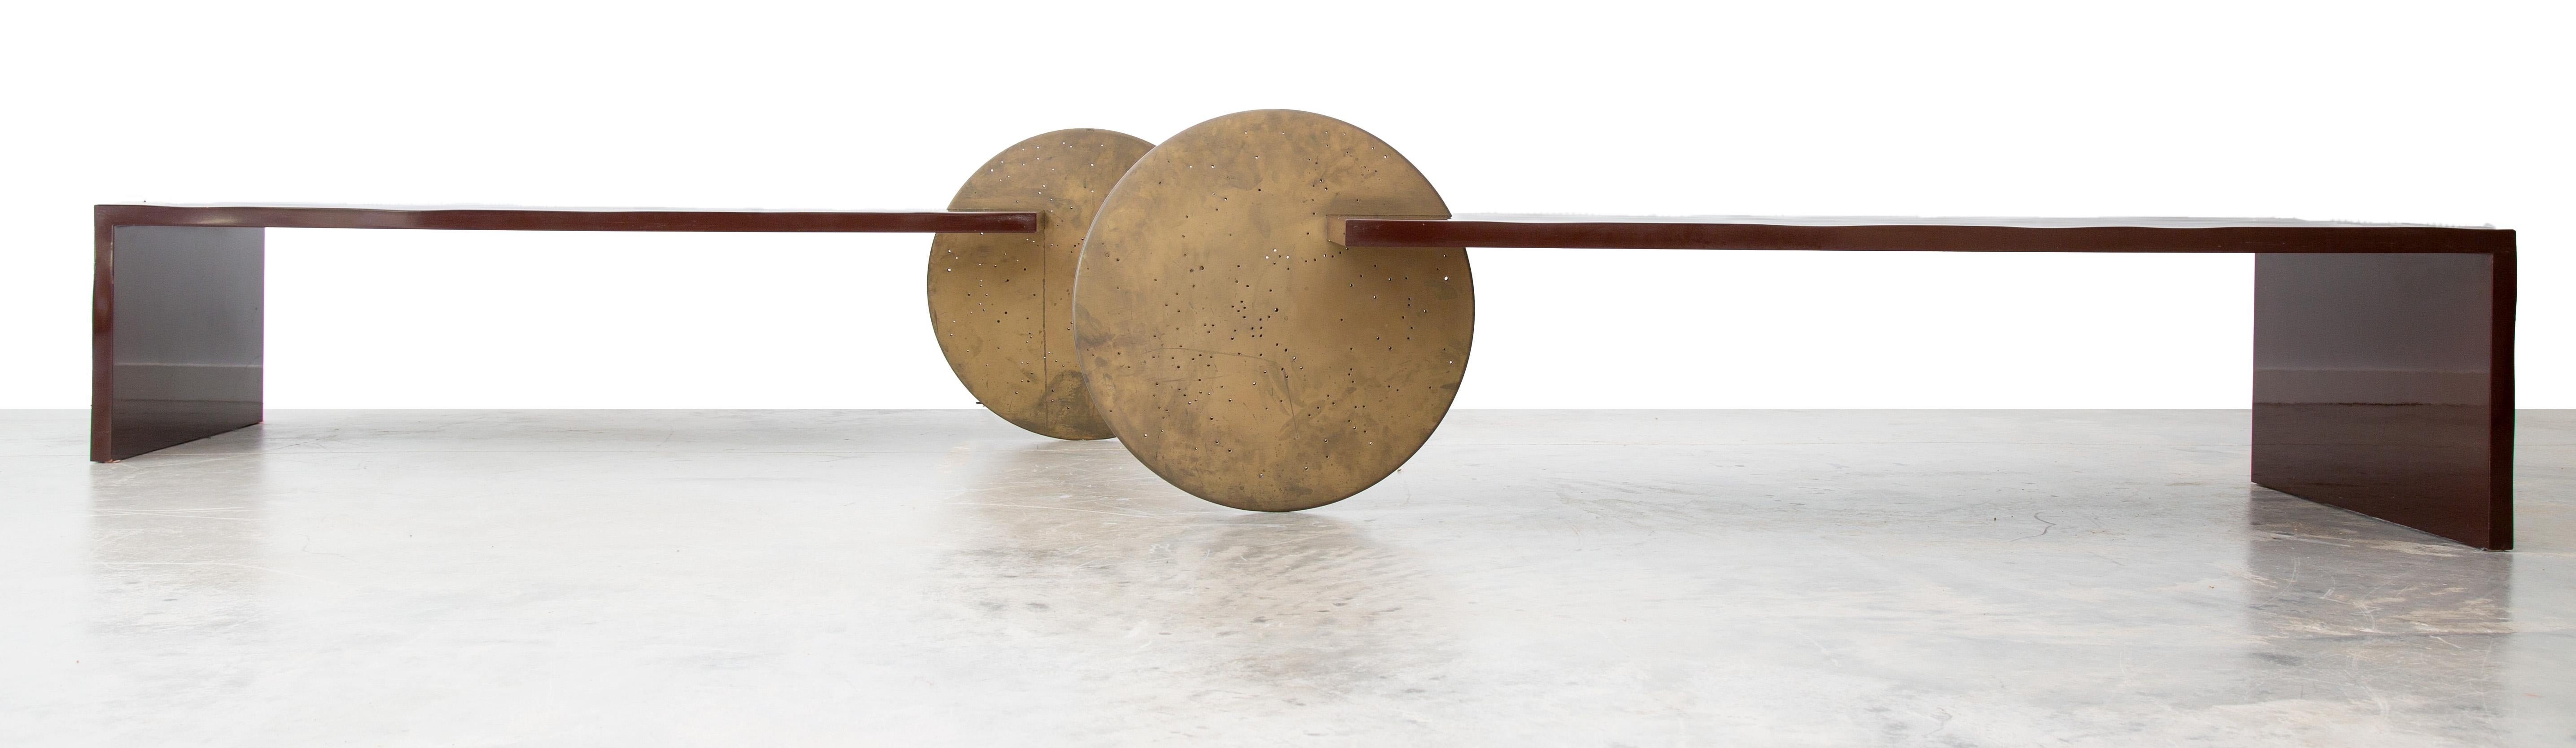 Contemporary Borealis Table by Patrick Elie Naggar for Ralph Pucci 2003  Maroon and Brass For Sale